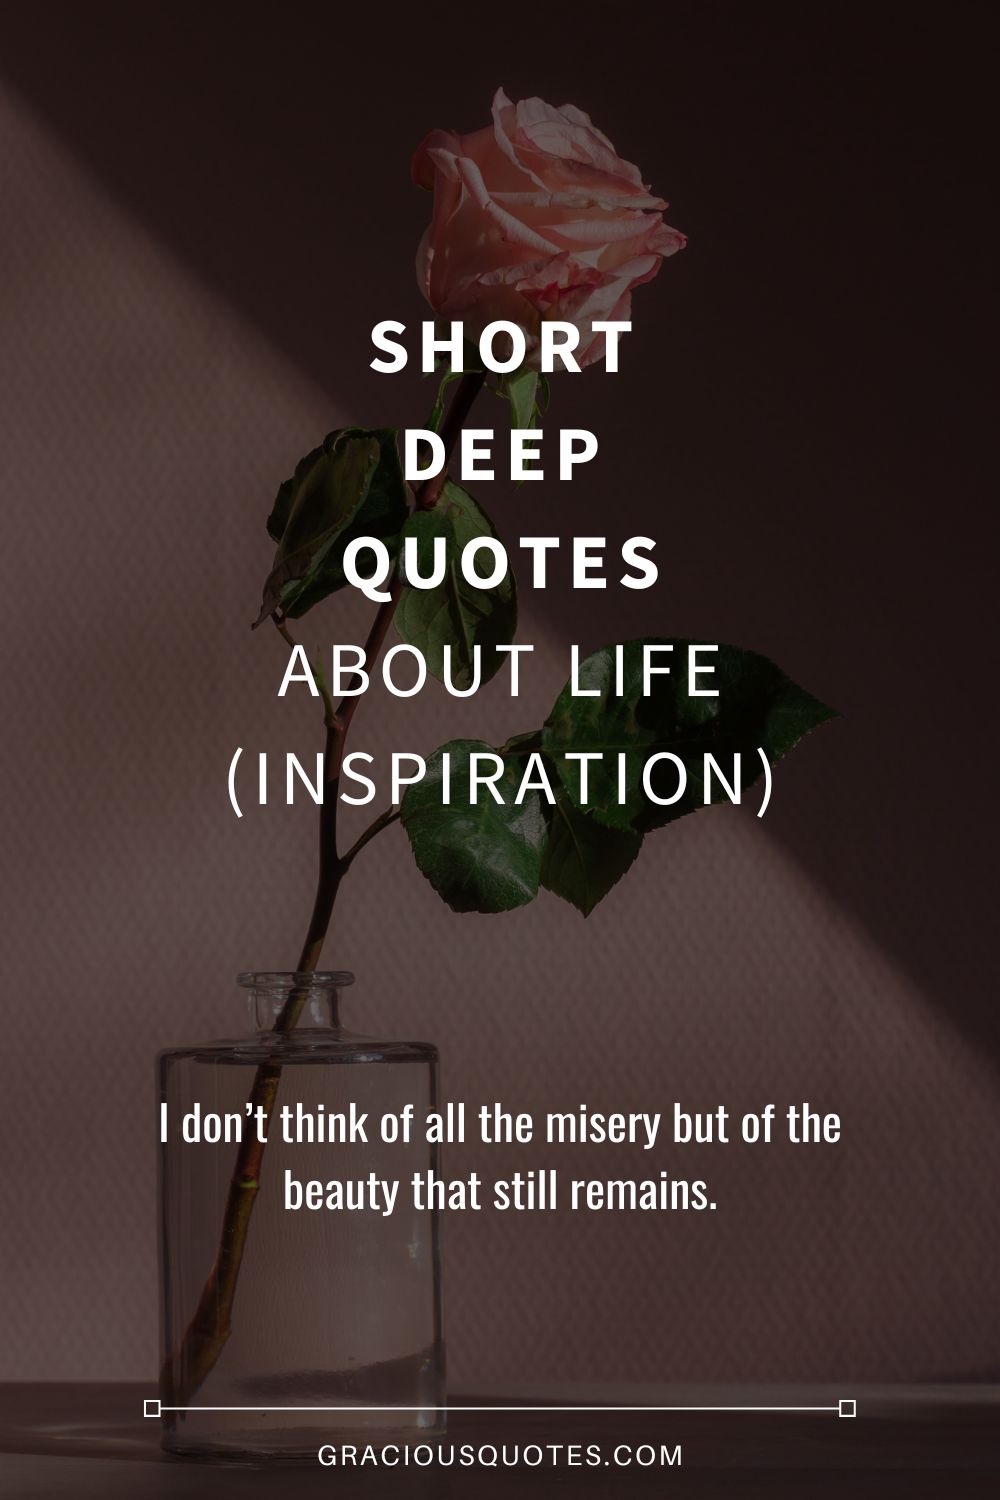 Short Deep Quotes About Life (INSPIRATION) - Gracious Quotes